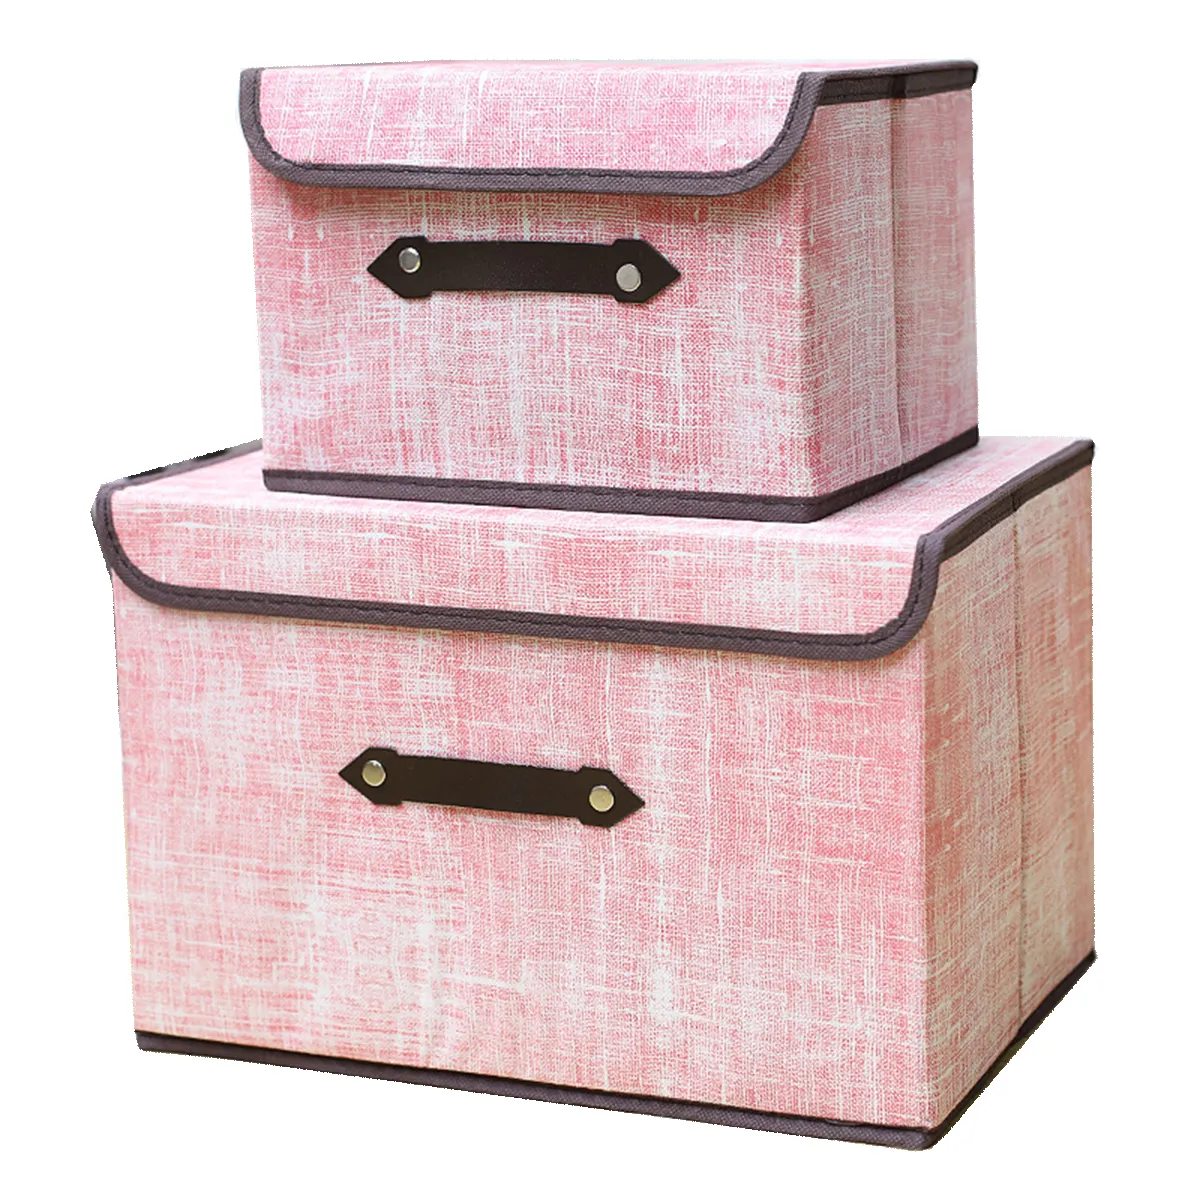 4008147 PU Leather Handles PP Plastic Board Foldable Storage Boxes Cubes Baskets Closet Organizer Container with lids